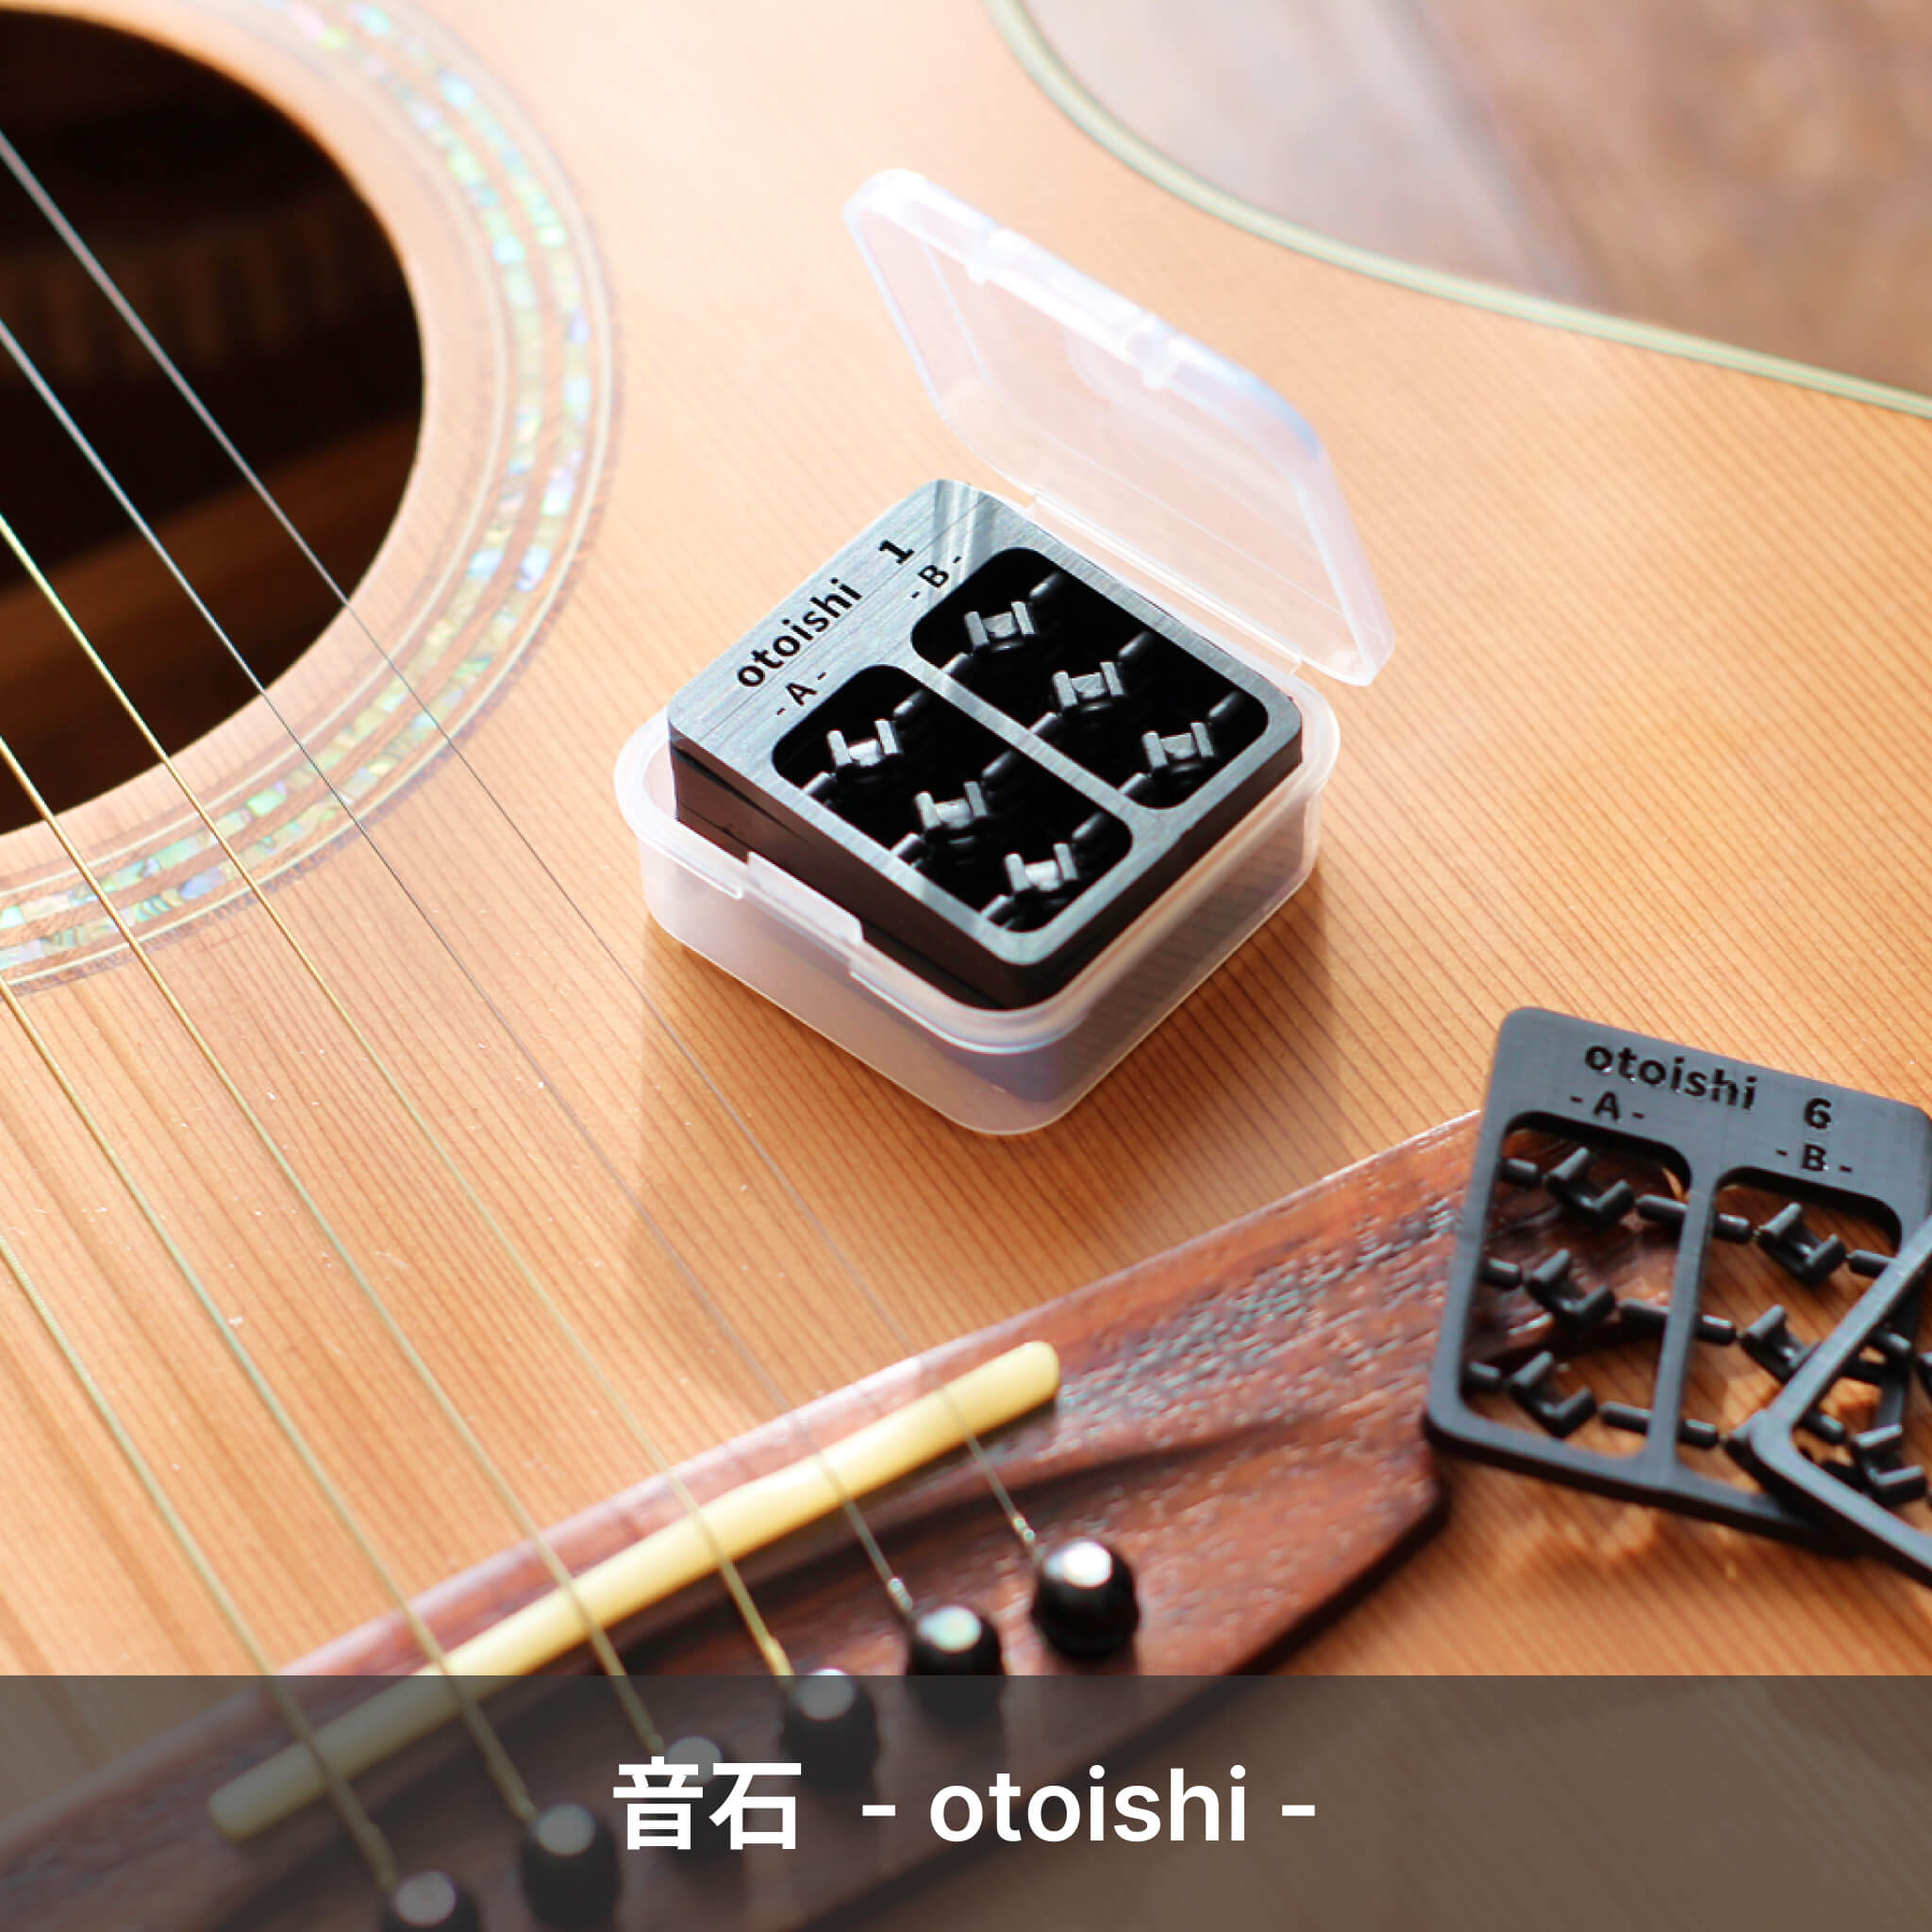 Pitch improvement tool "otoishi" for those who are concerned about fret tone deafness